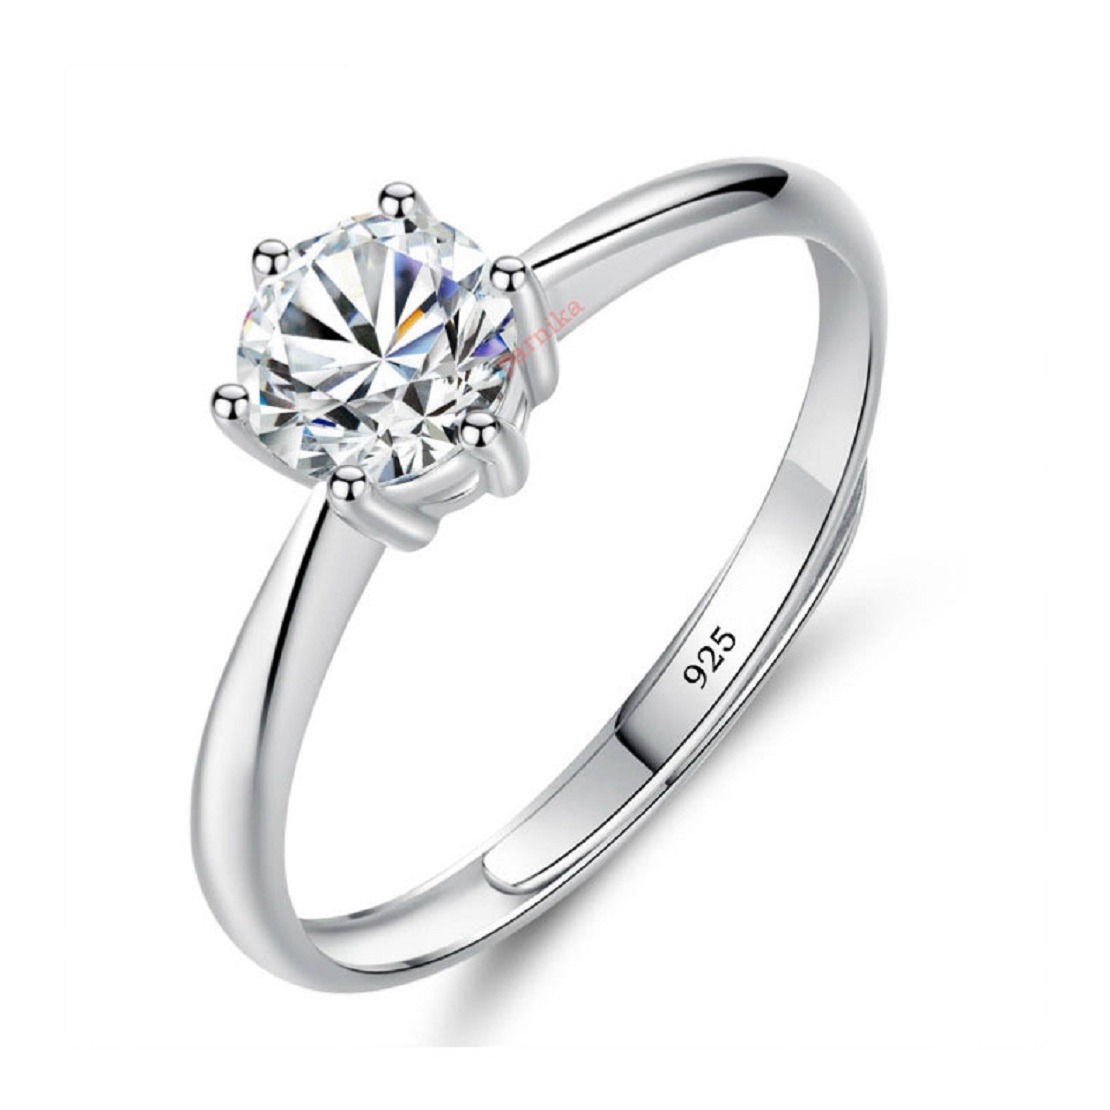 Vintage Inspired Solitaire Engagement Ring - Safian & Rudolph Jewelers